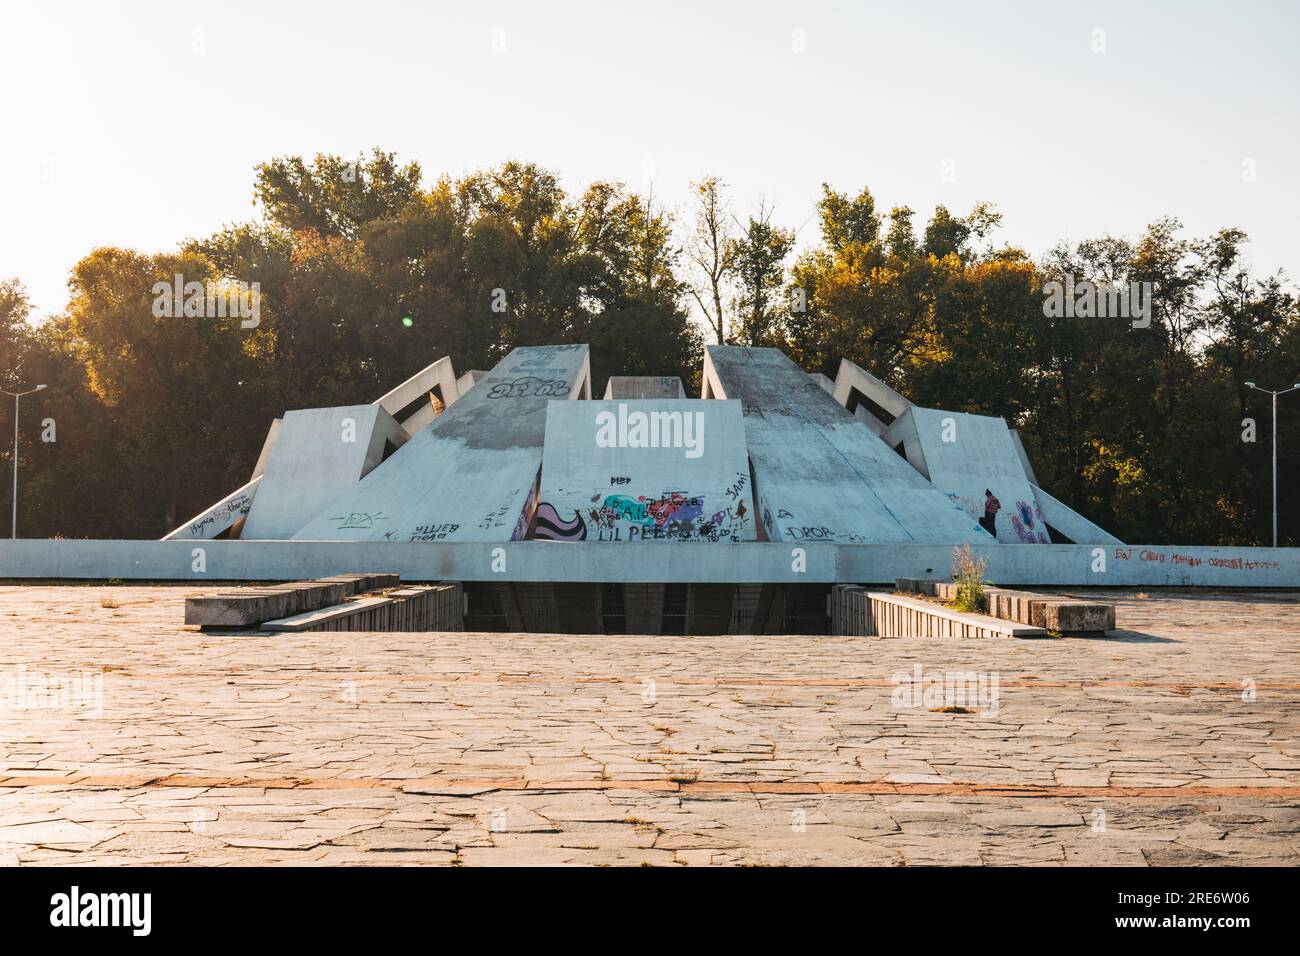 The Fraternal Barrow Memorial Complex, a concrete Soviet memorial built in Plovdiv, Bulgaria, in 1974 Stock Photo